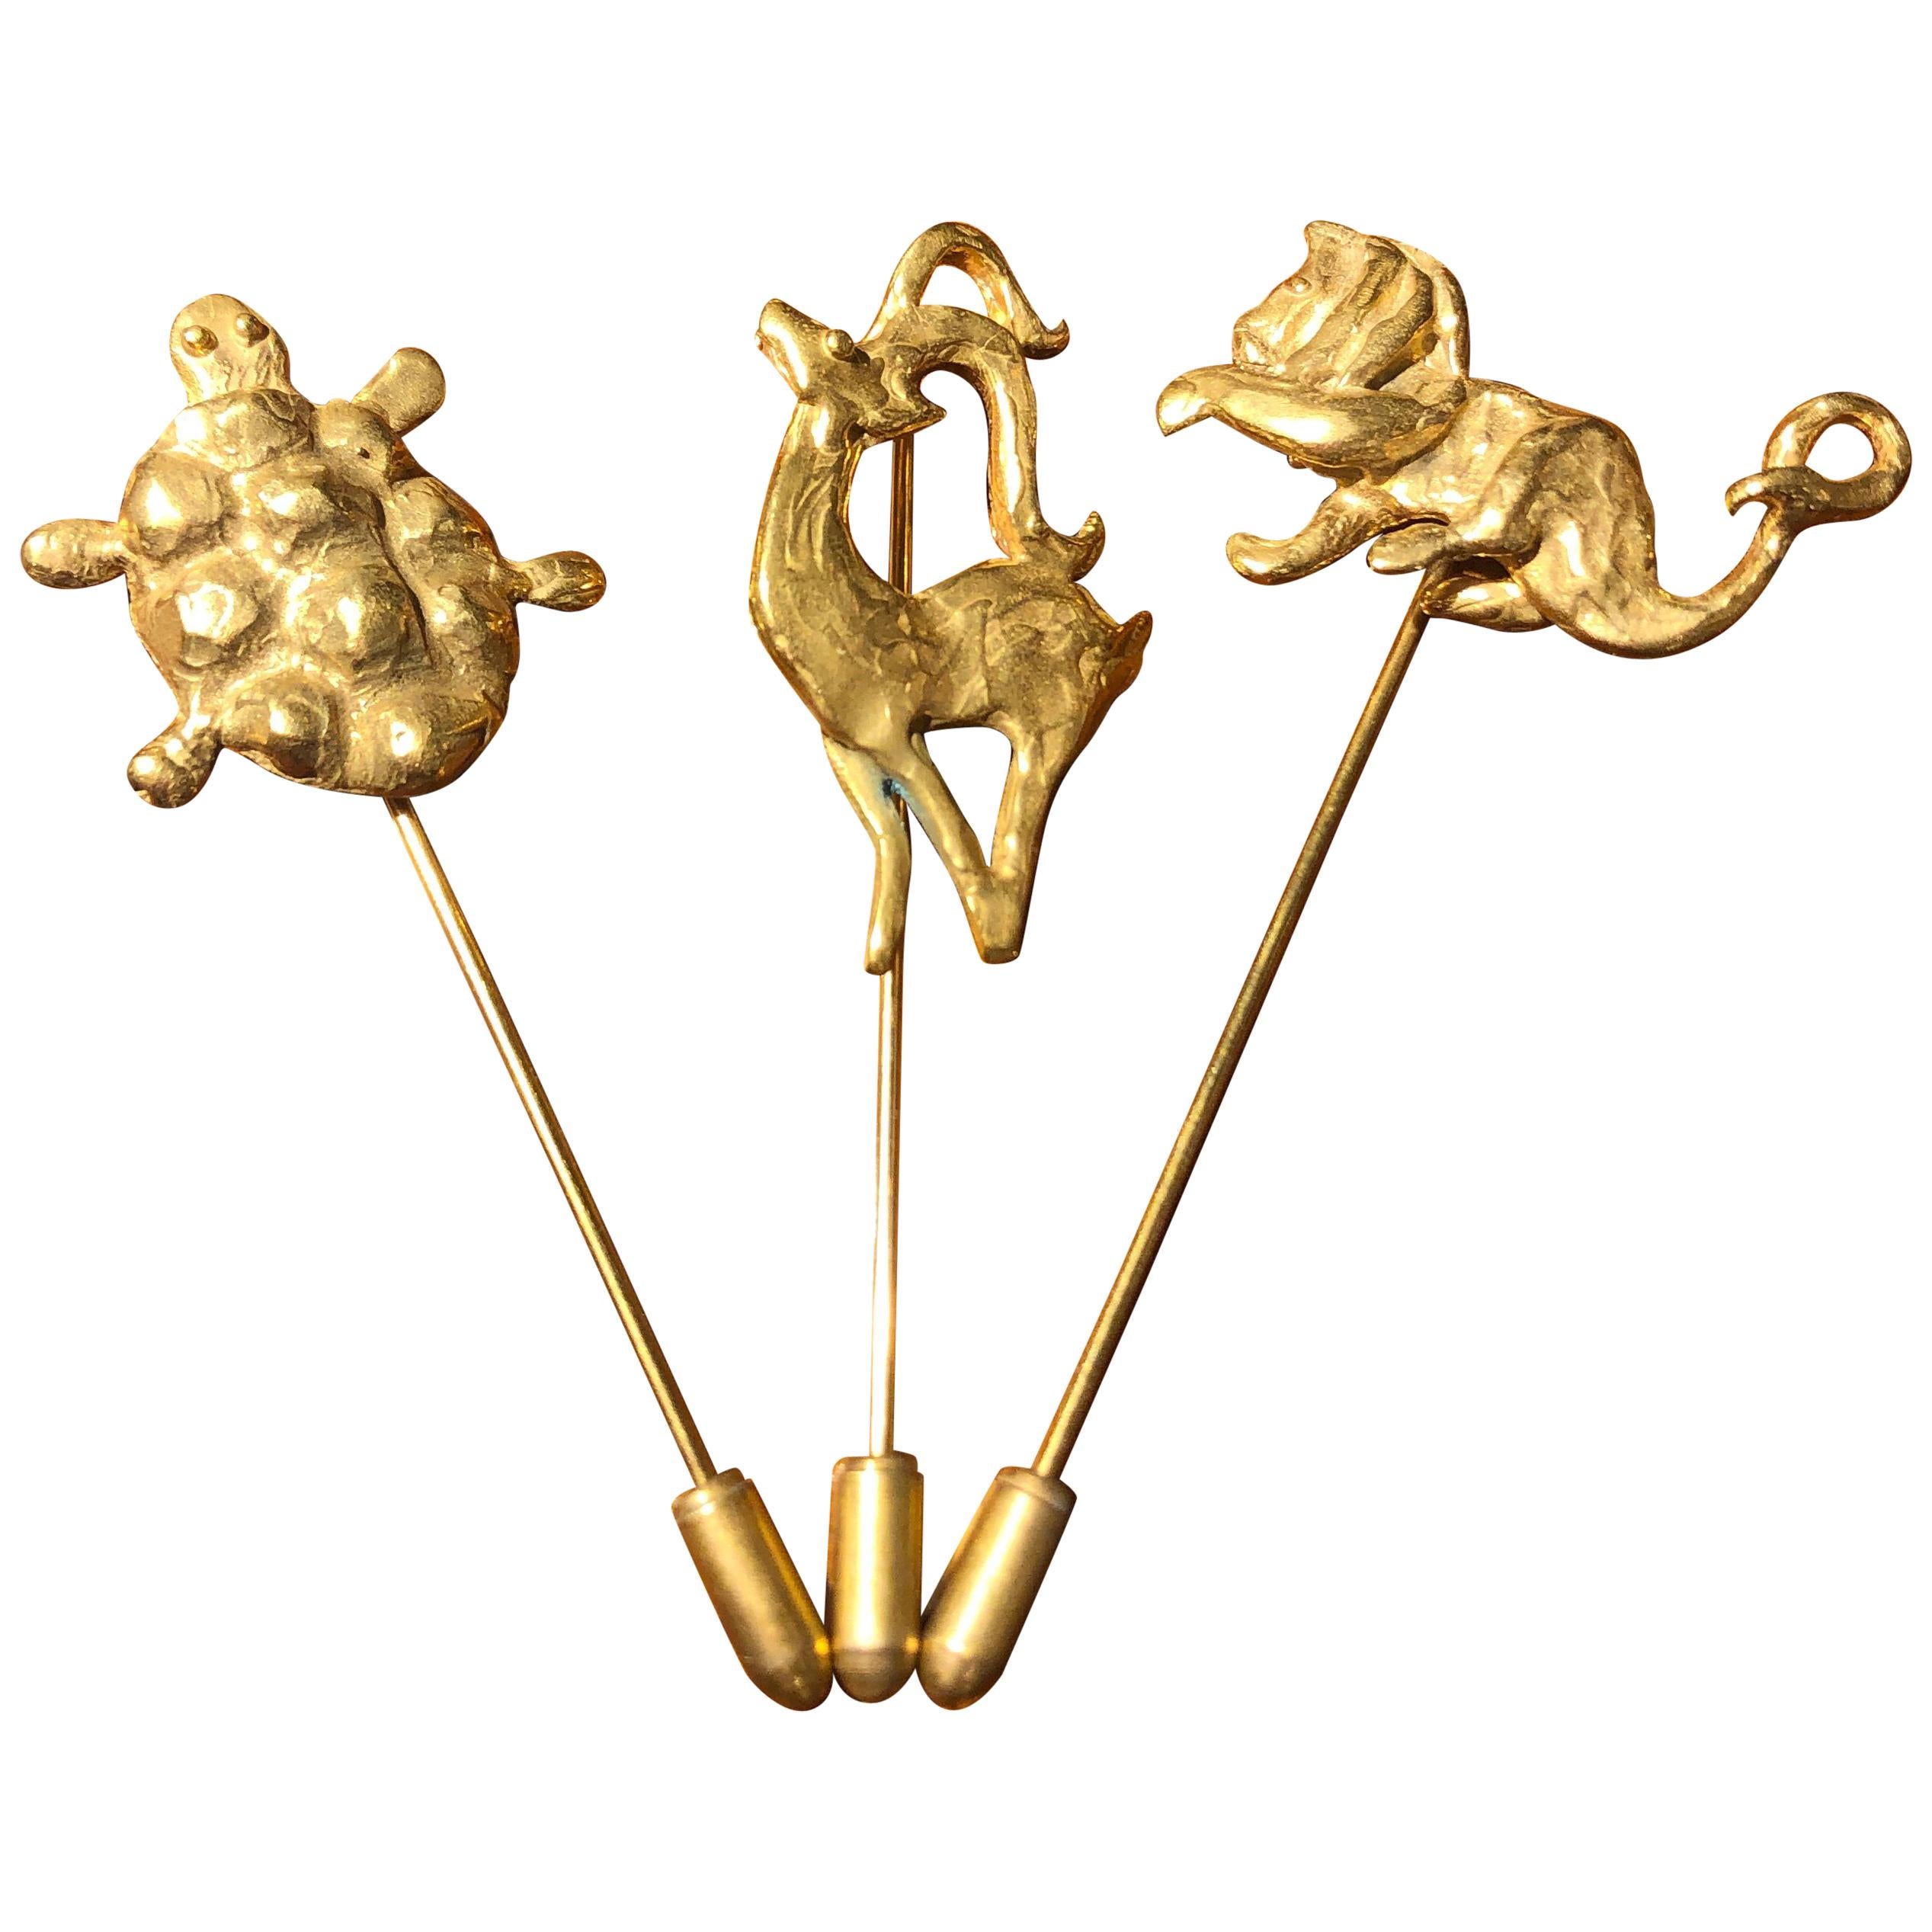 Gold-Plated Bronze "Animal" Brooches by Franck Evennou, France, 2018